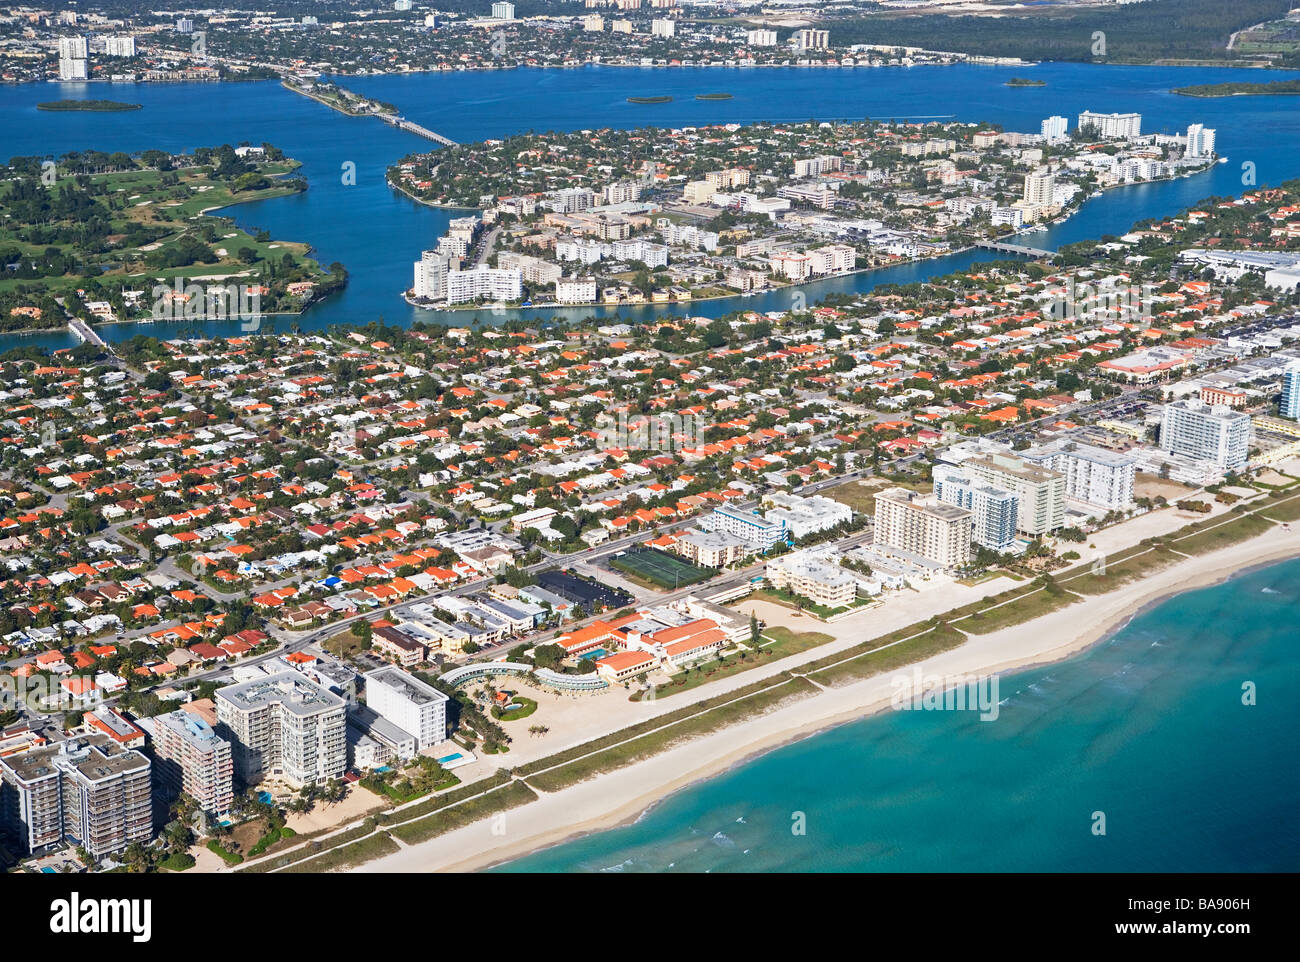 Aerial view of waterfront city Stock Photo